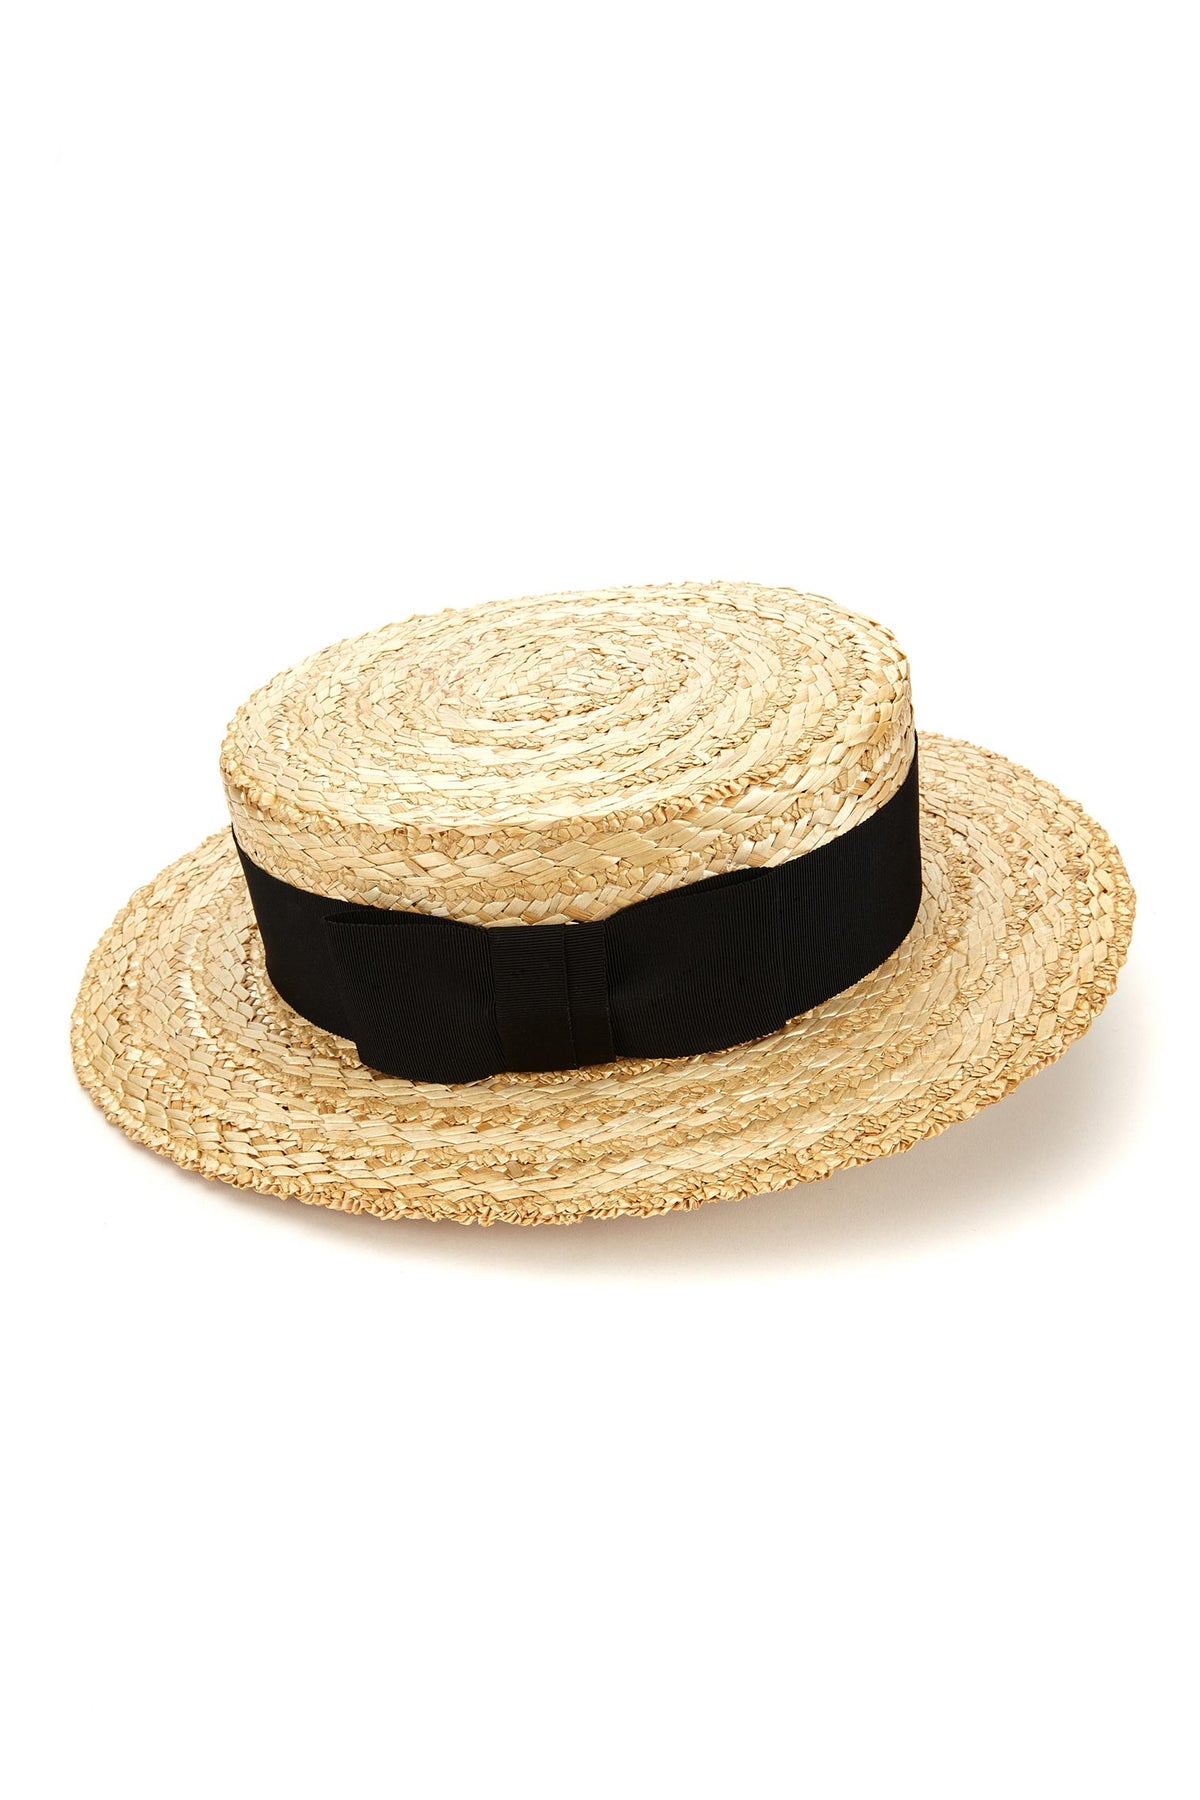 Classic Boater Straw Hat - Lock & Co. Hatters UK